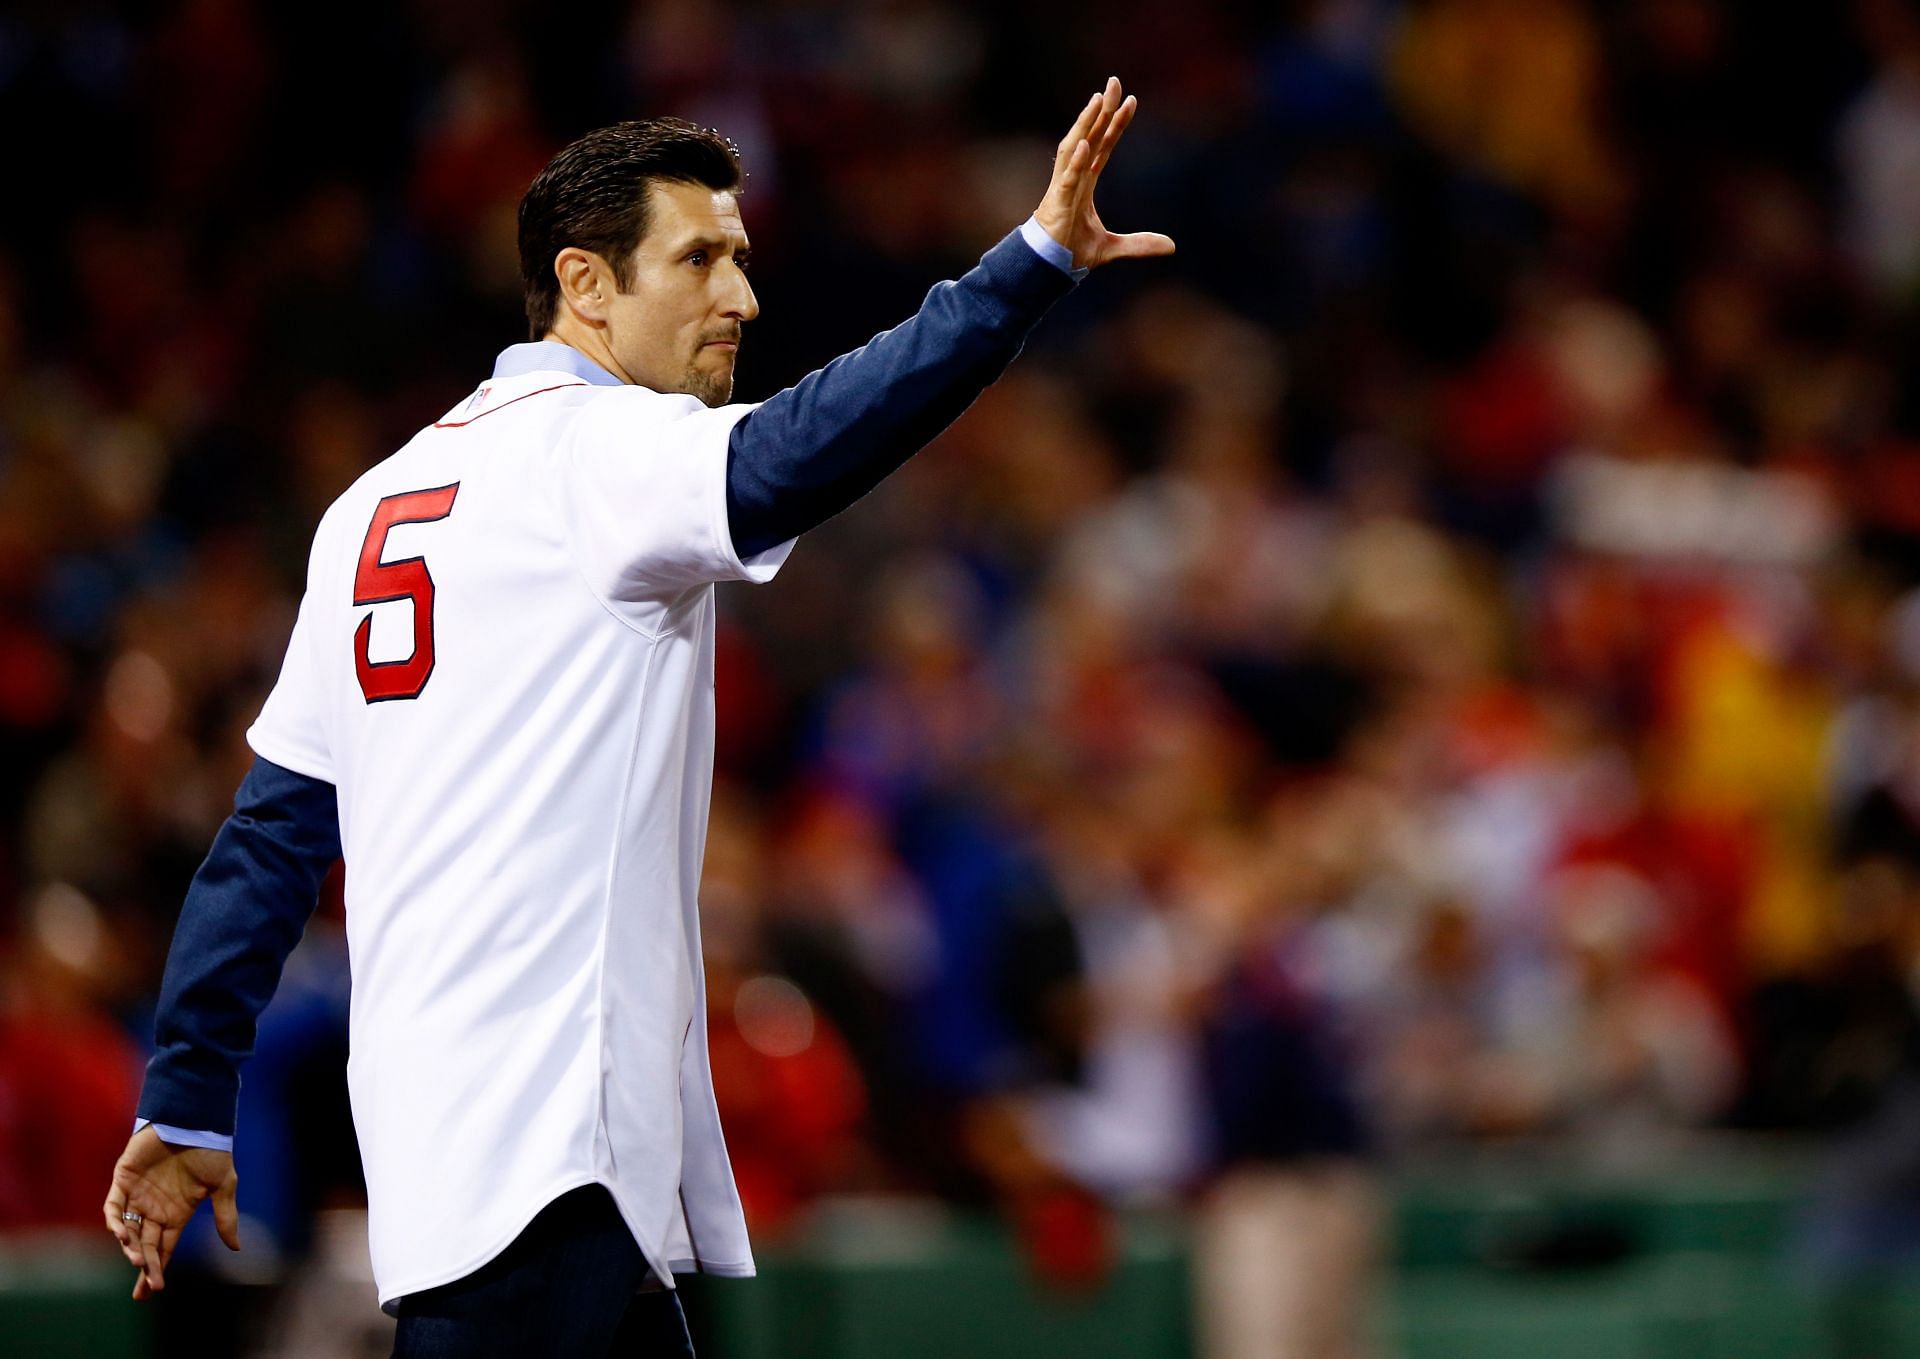 Former Boston Red Sox star Nomar Garciaparra once claimed that the